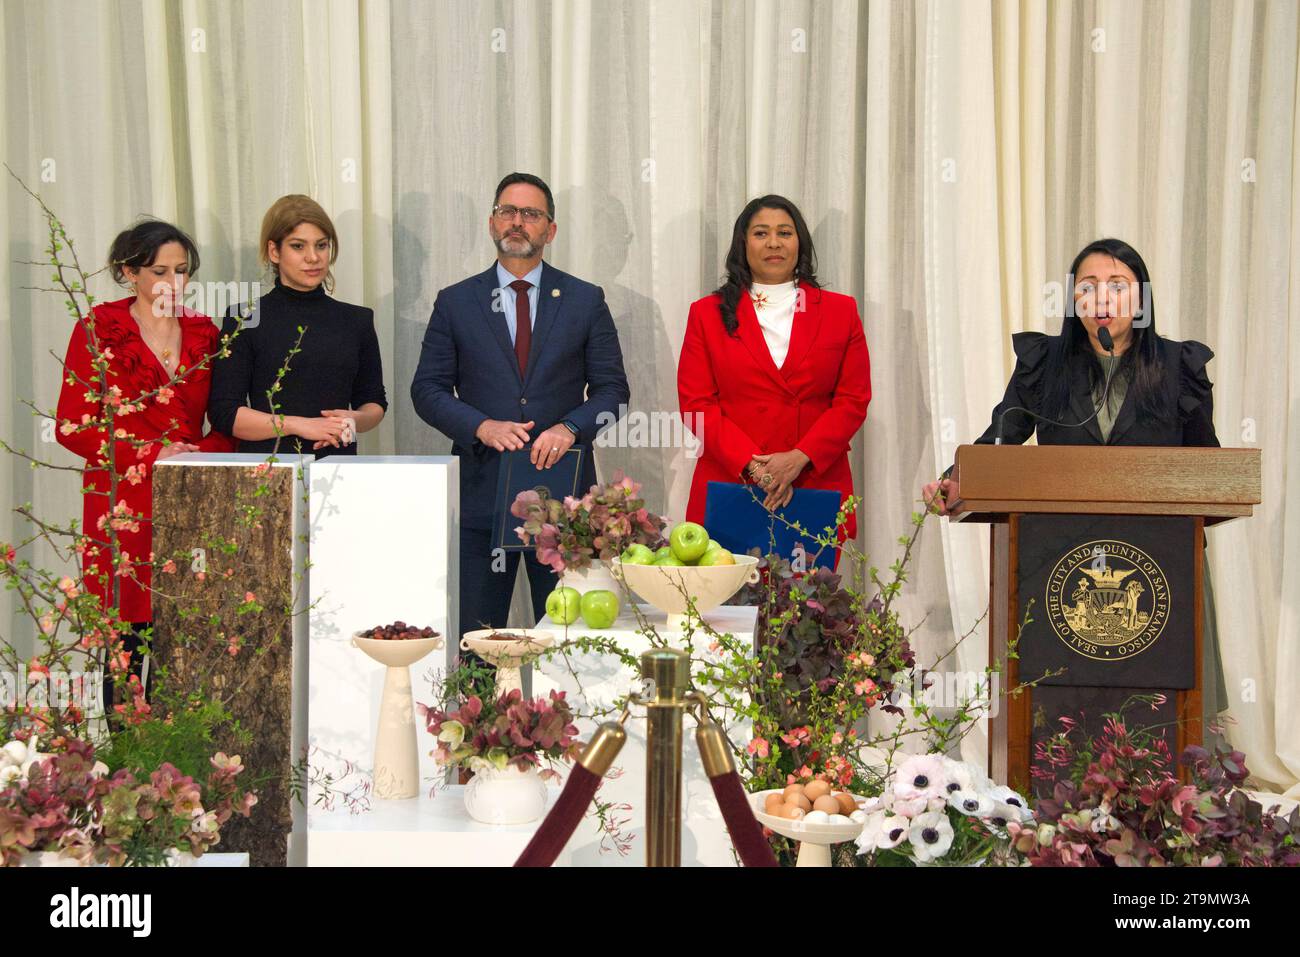 San Francisco, CA - March 24, 2023: Sepideh Nasiri, CEO and Founder of Persian Women in Tech speaking at Nowruz celebration at City Hall. Nowruz, the Stock Photo